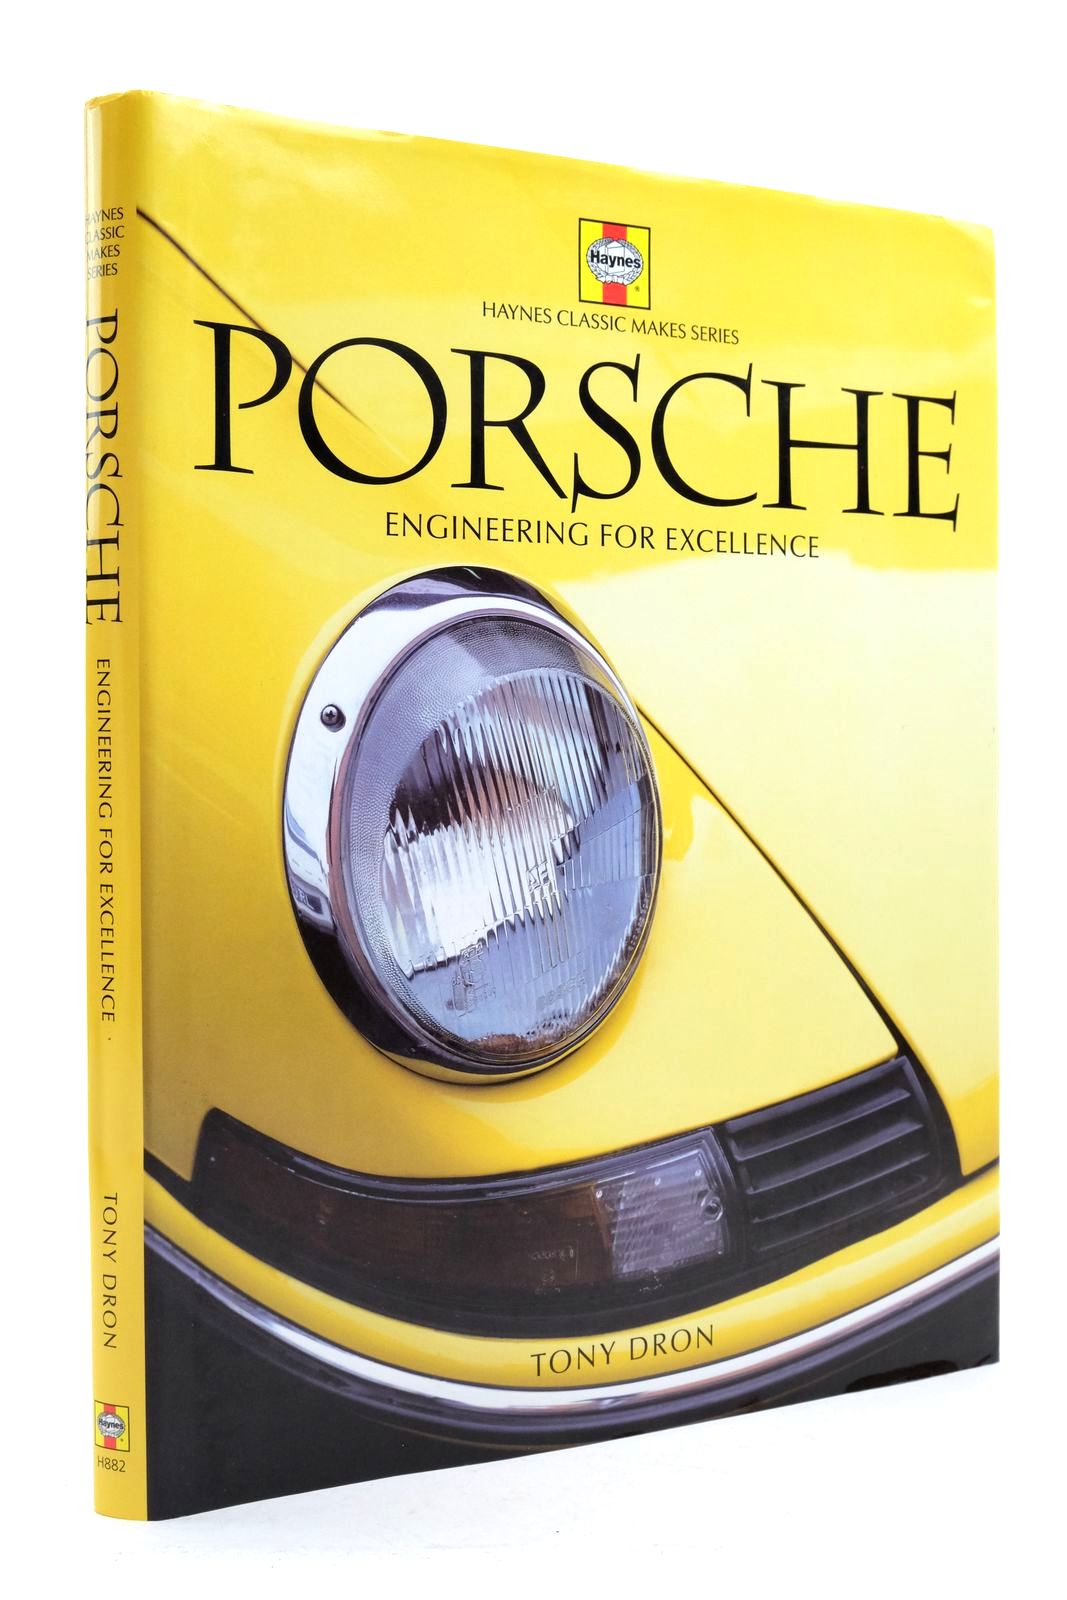 Photo of PORSCHE: ENGINEERING FOR EXCELLENCE written by Dron, Tony published by Haynes Publishing (STOCK CODE: 2138911)  for sale by Stella & Rose's Books